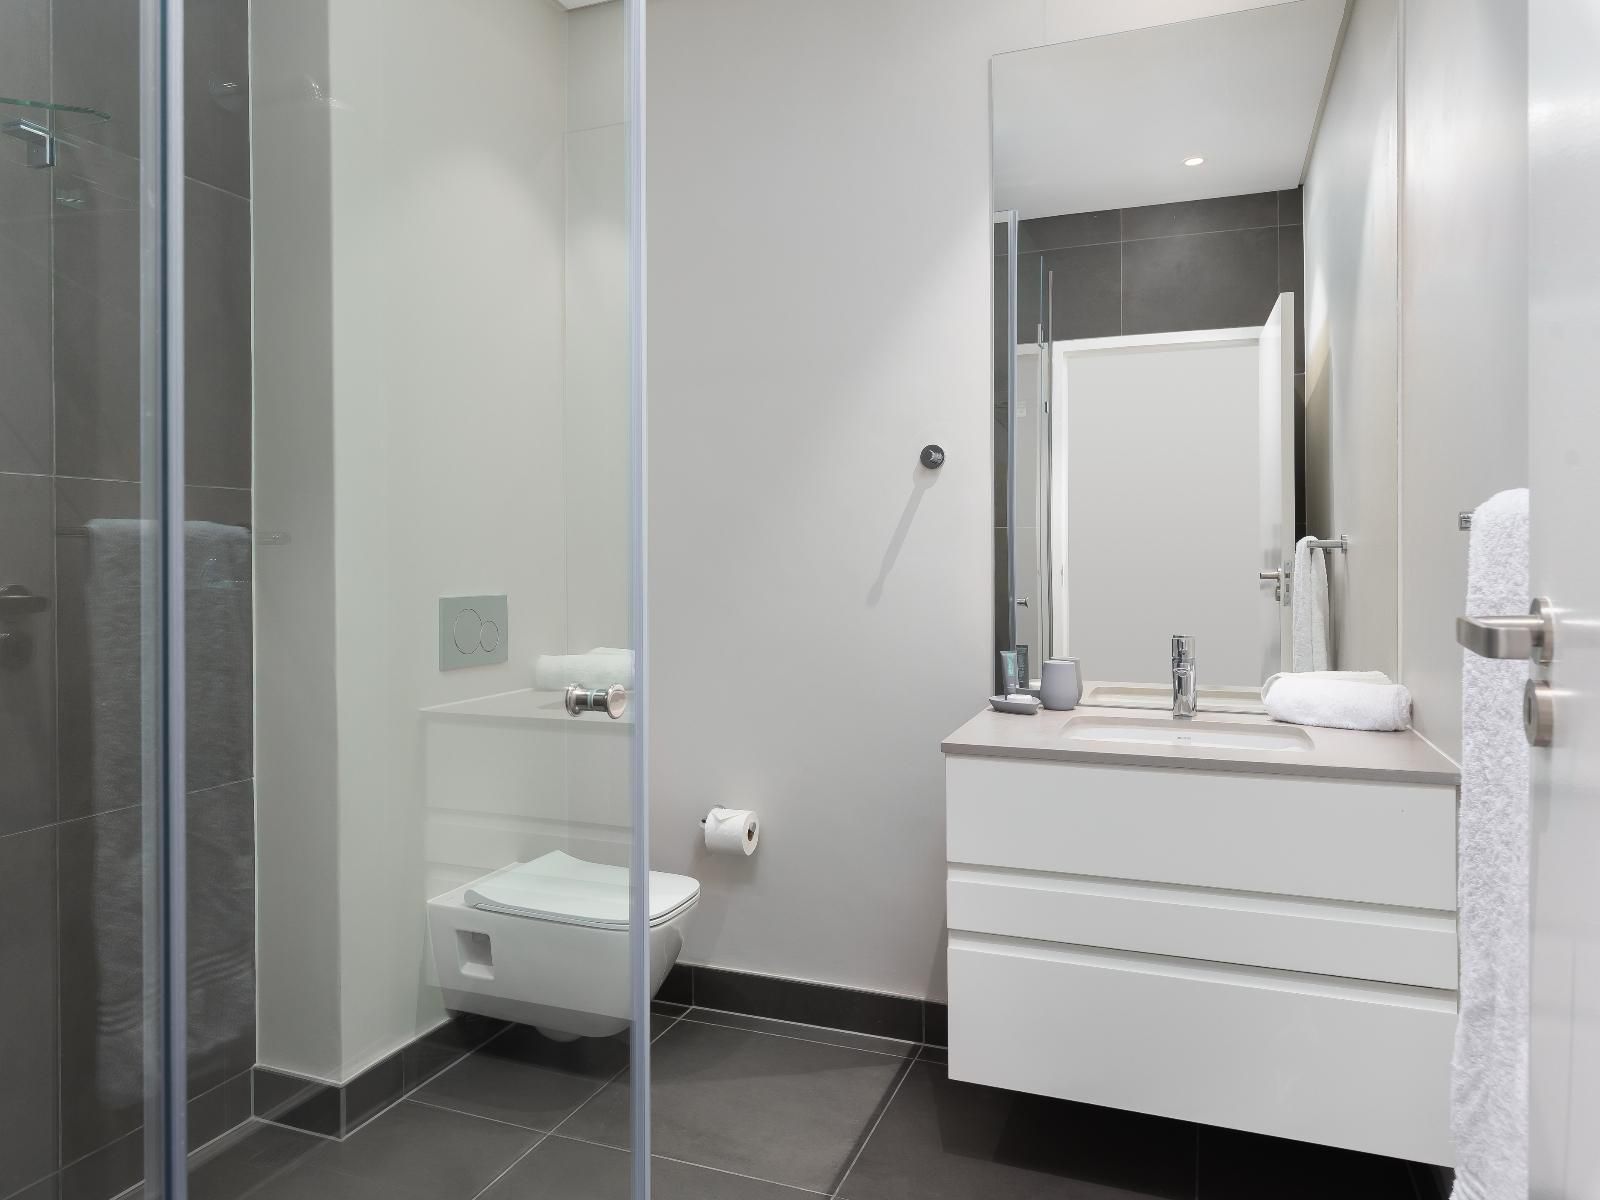 Home From Home Axis Apartments Century City Cape Town Western Cape South Africa Colorless, Bathroom